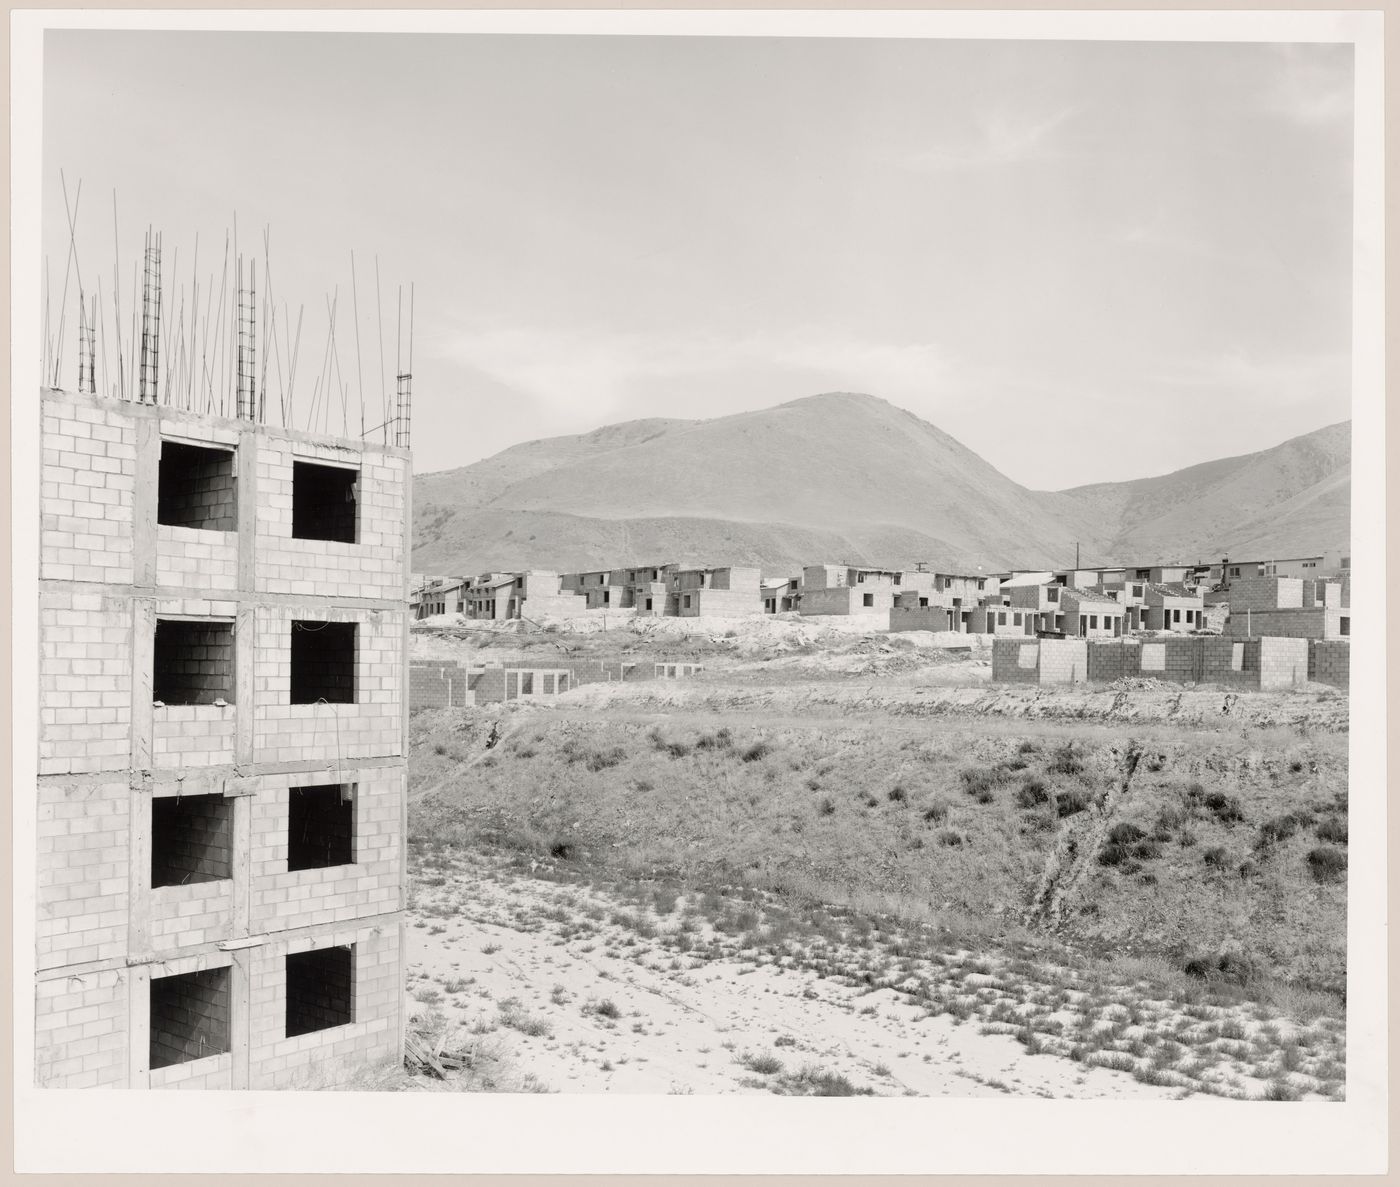 View of an industrial park under construction with a partially completed building in the foreground and partially completed houses and mountains in the background, Mesa de Otay, Tijuana, Baja California, Mexico